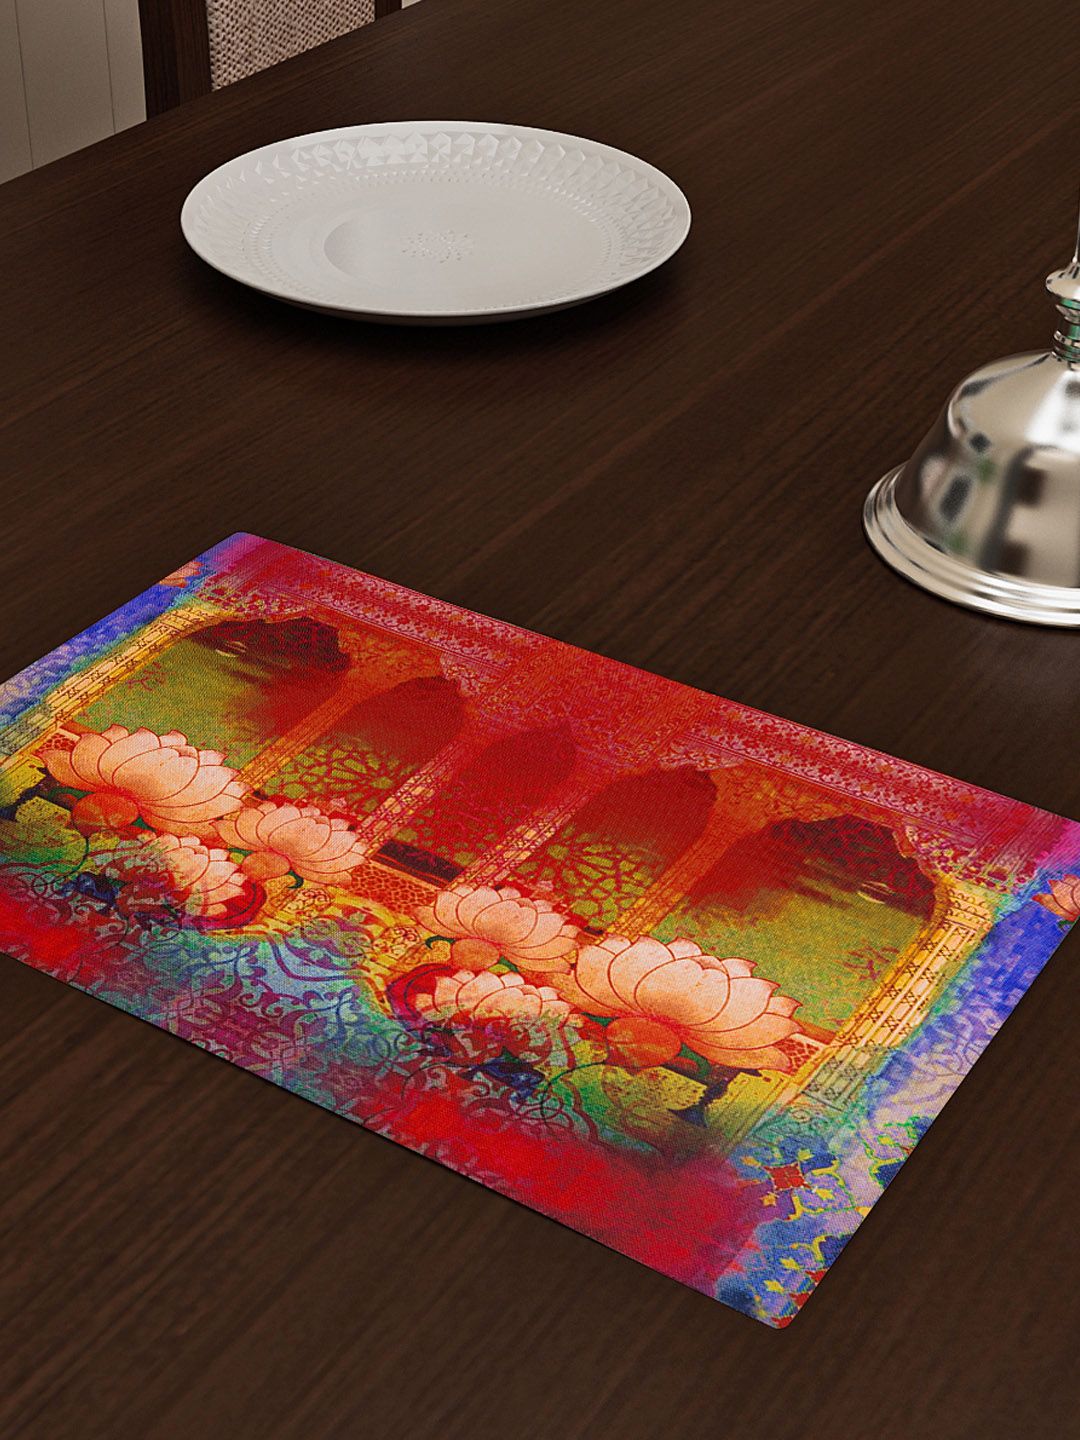 SEJ by Nisha Gupta Red Set of 8 Printed Table Placemats Price in India